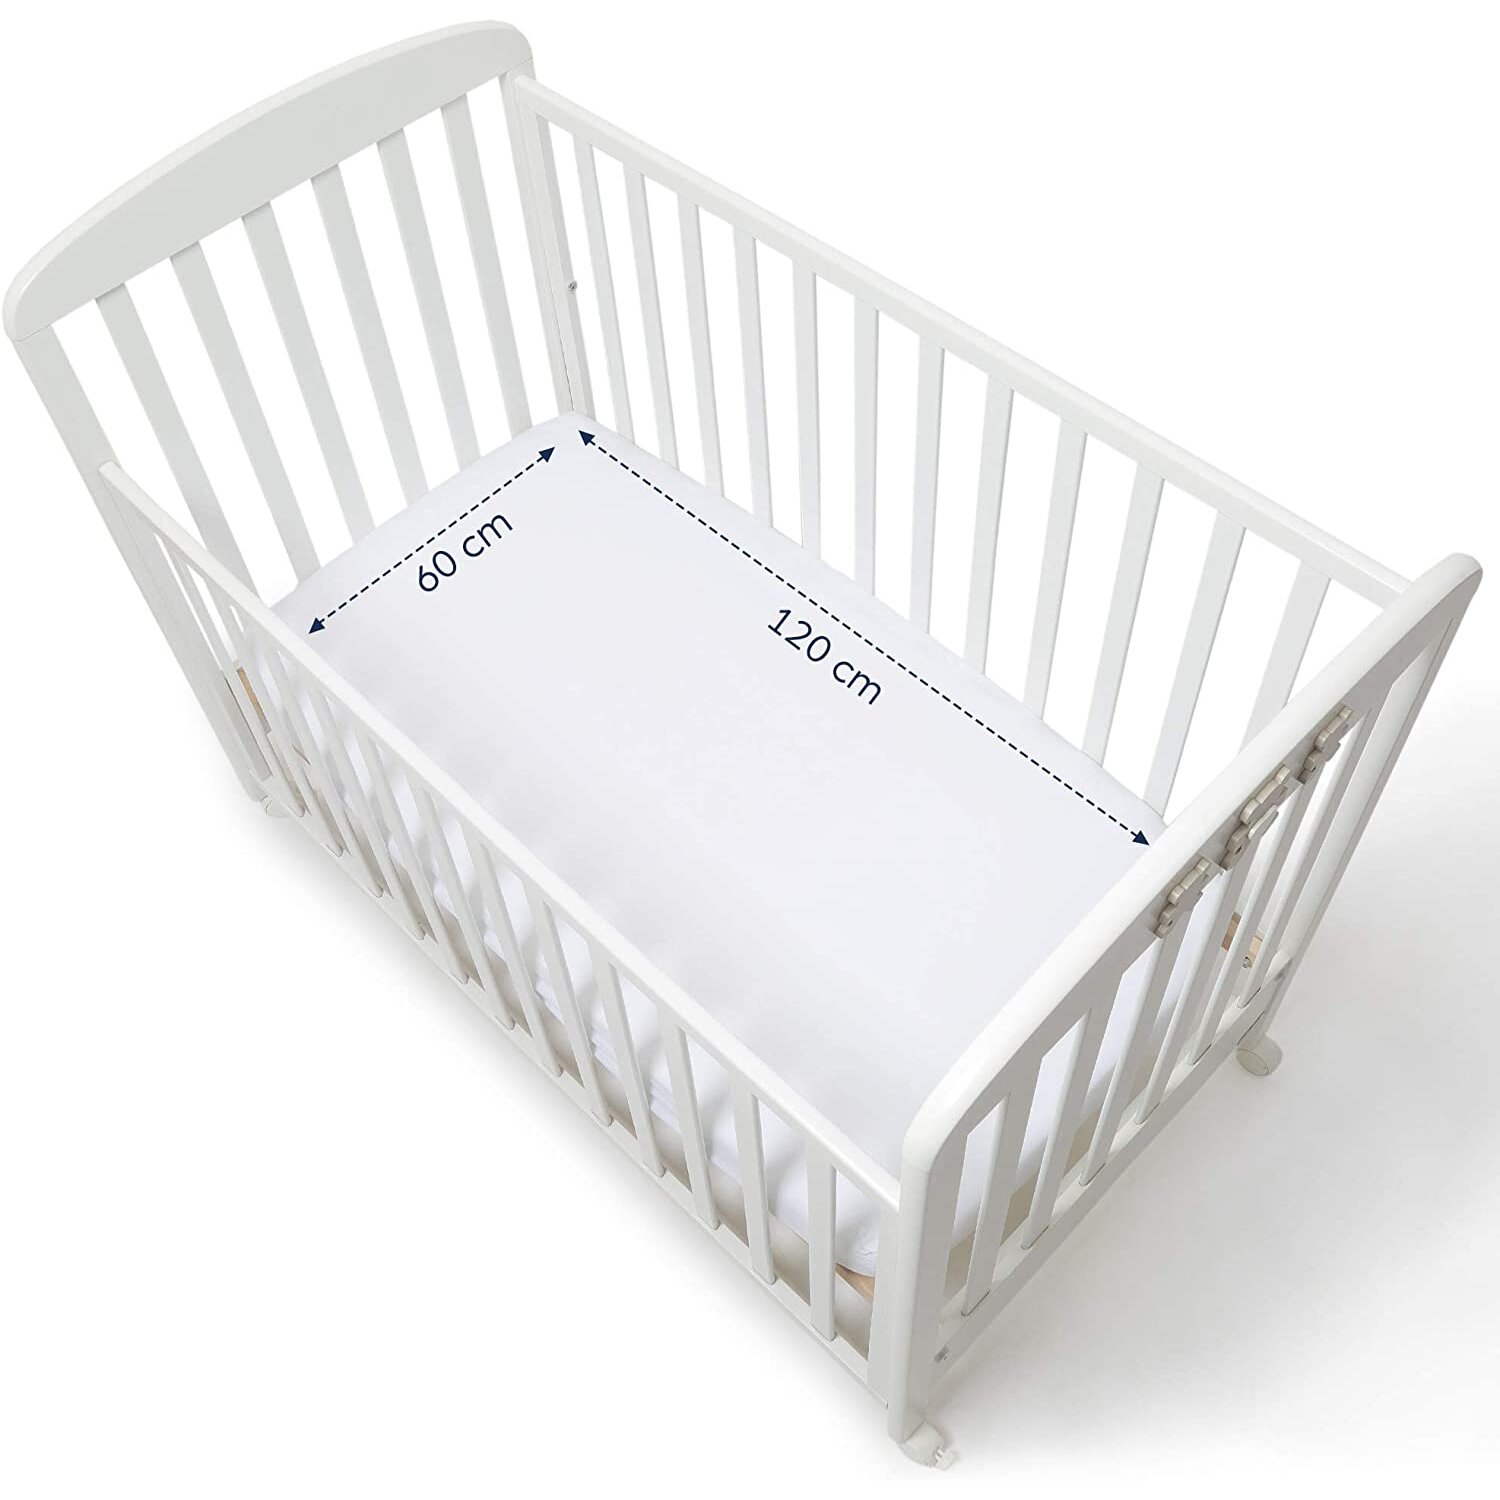 Niimo Cot Bed Sheets Fitted 100% Soft Cotton for Baby Bed Cot and Cradle with Mattress Dimensions 120 x 60 cm Washable in Washing Machine